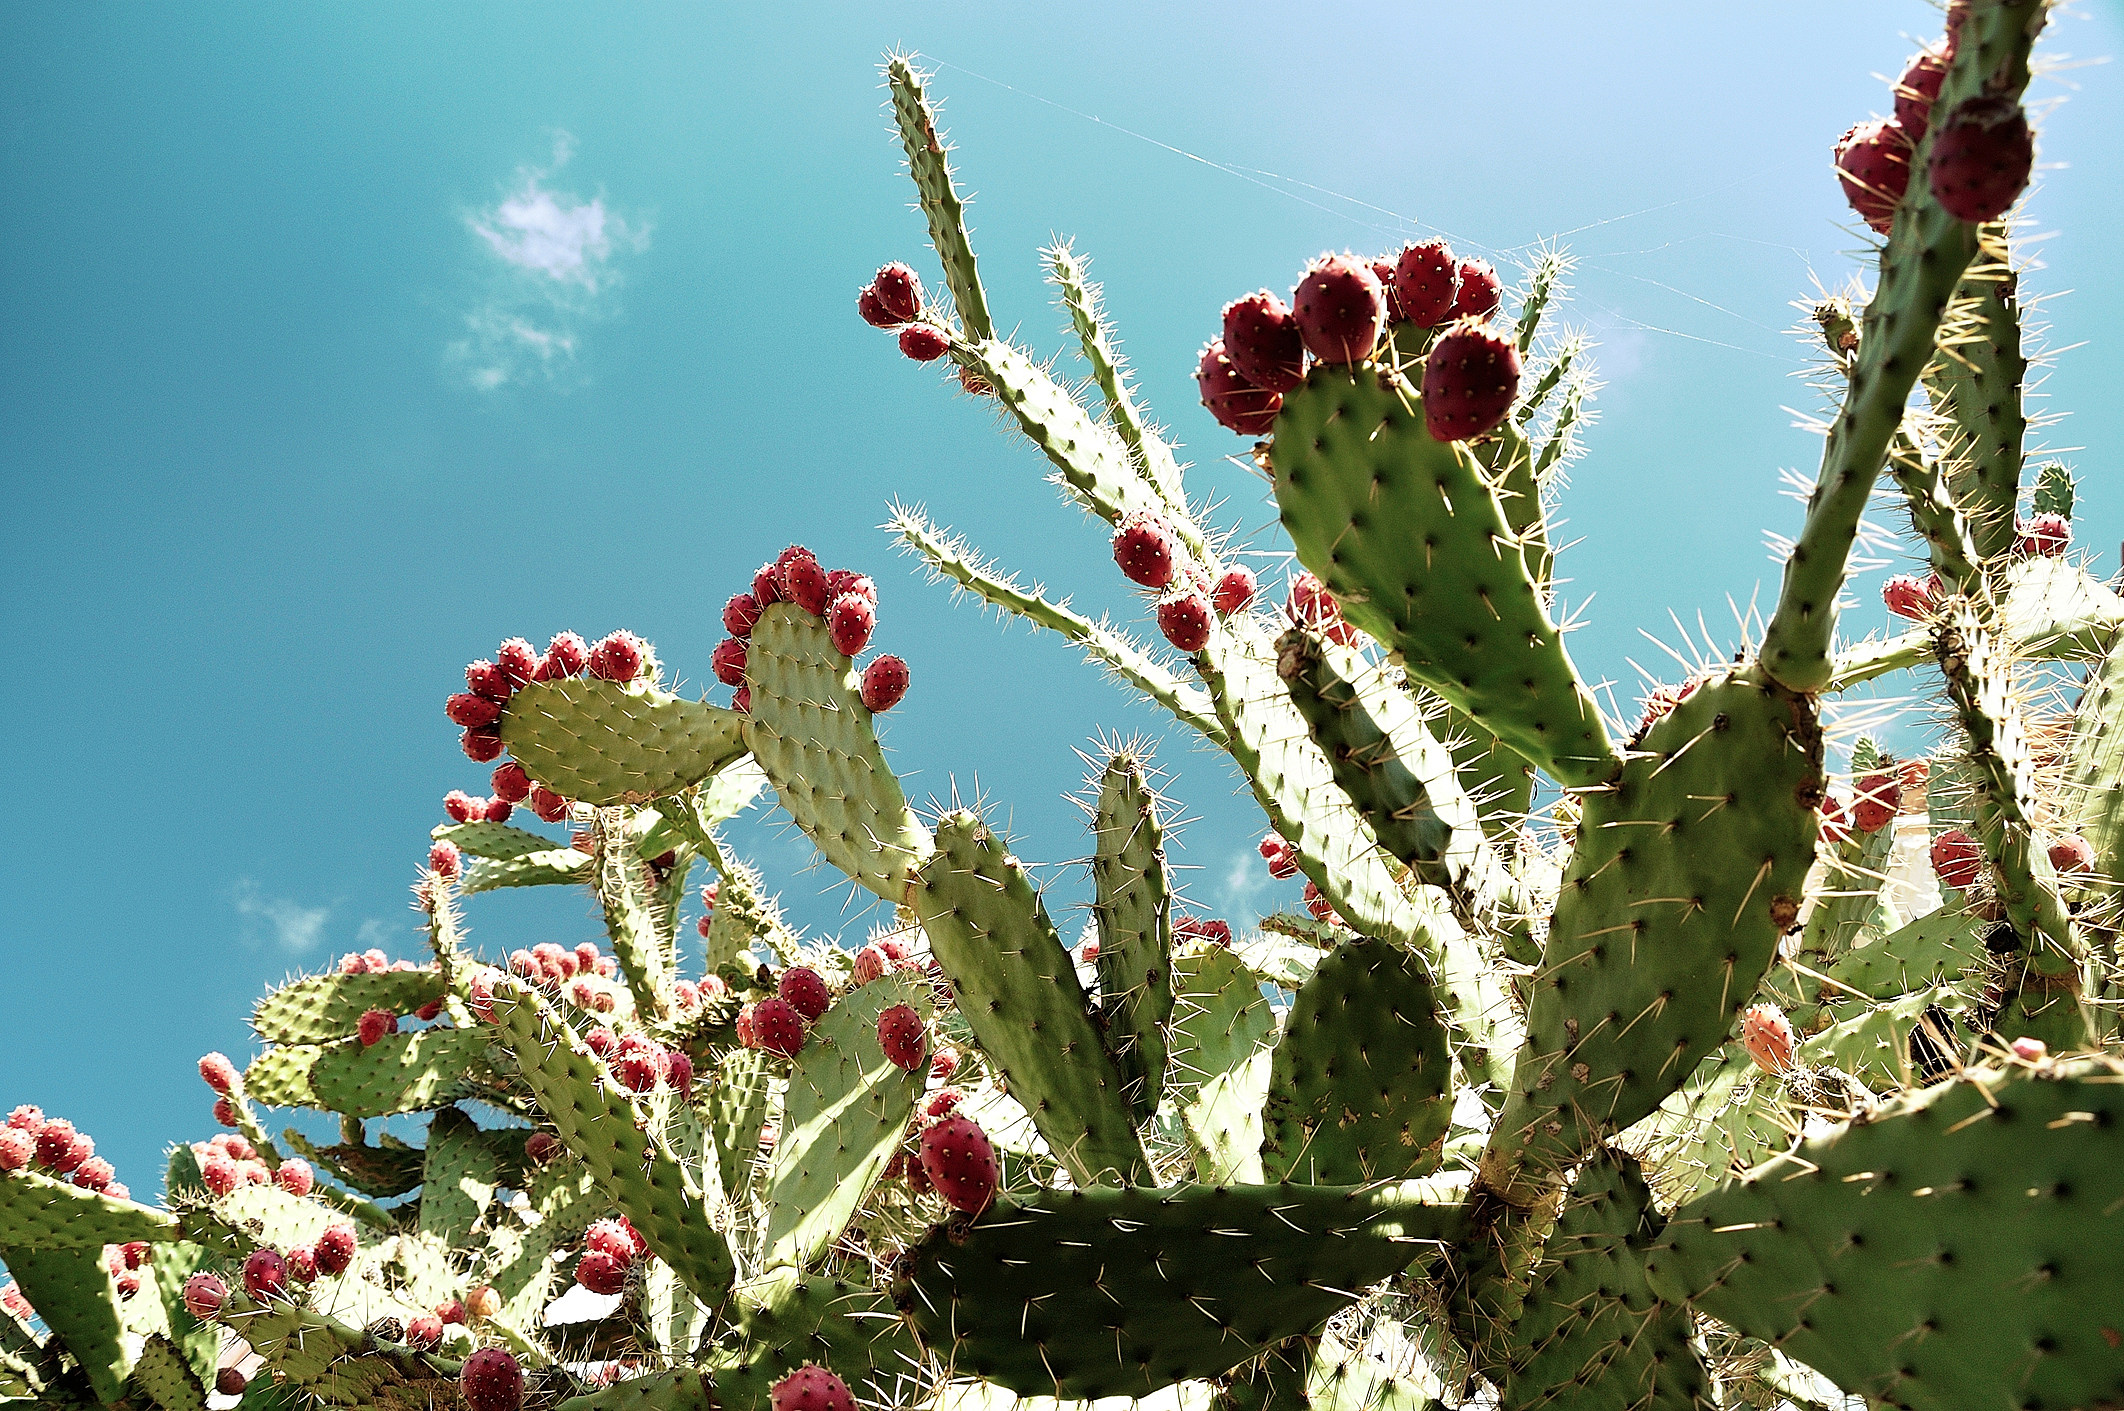 17. Can Cacti Be Used For Medicinal Purposes?